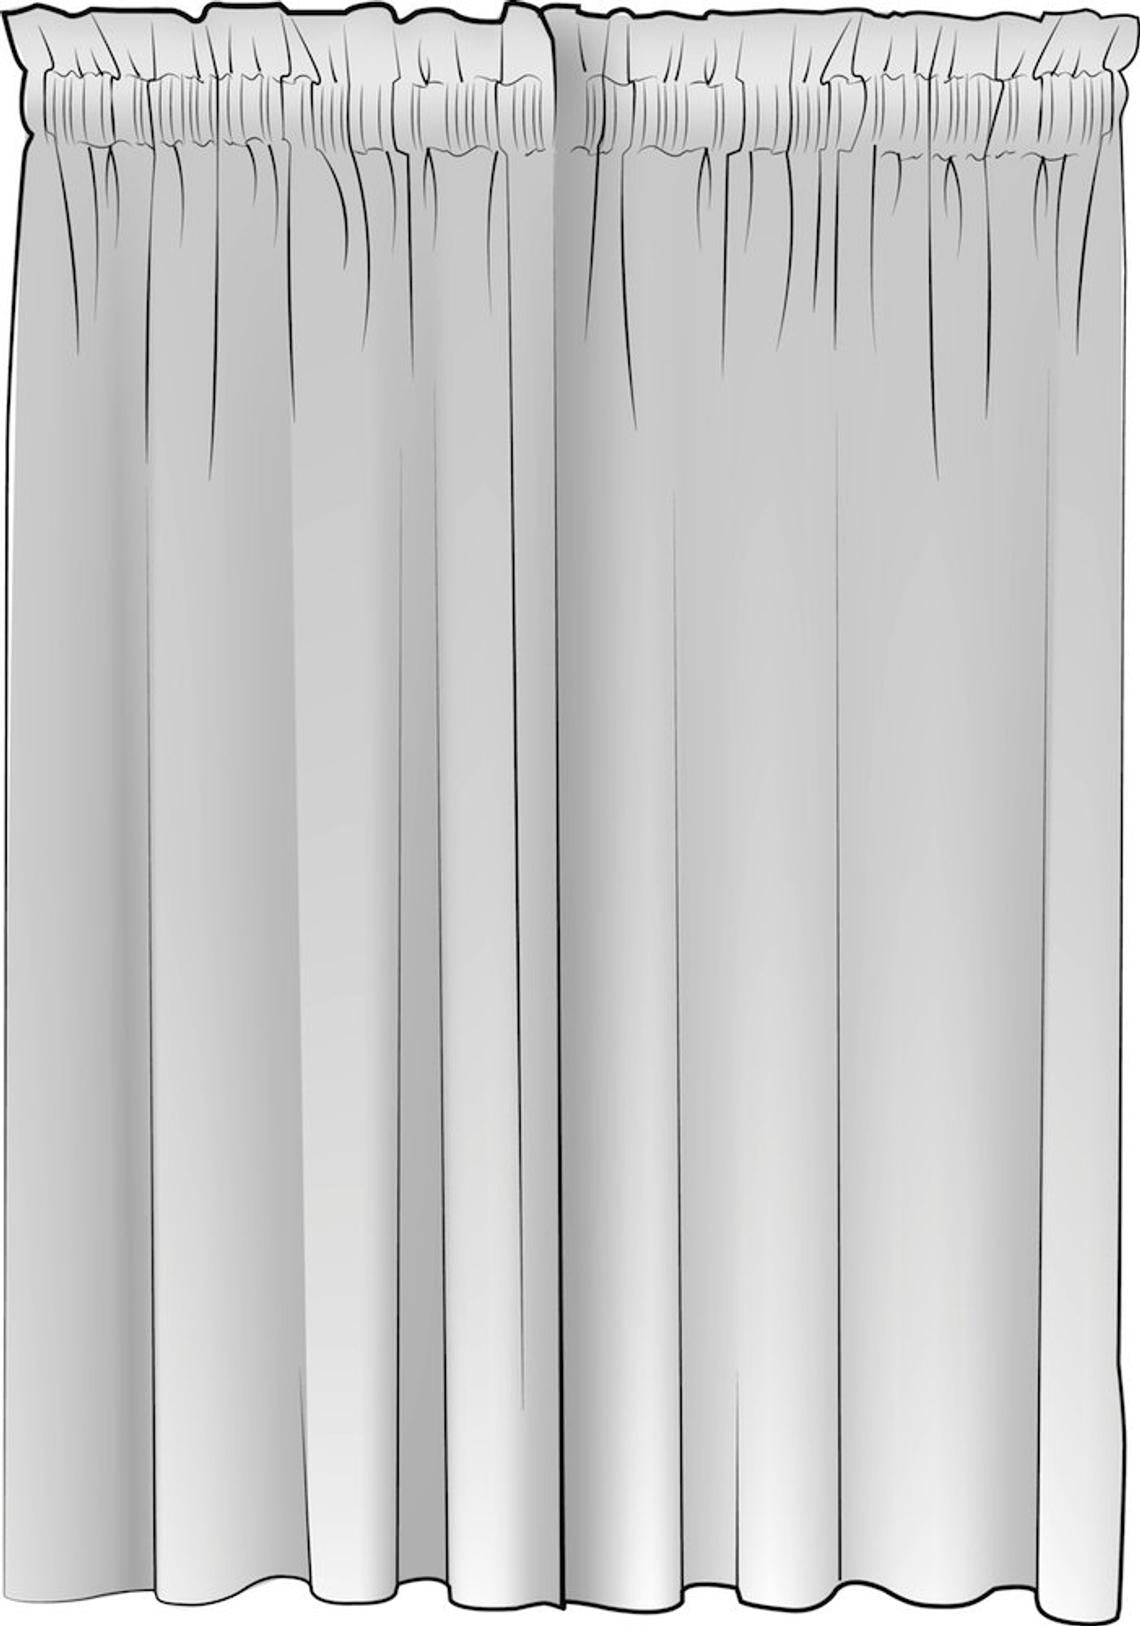 rod pocket curtain panels pair in classic pale blue ticking stripe